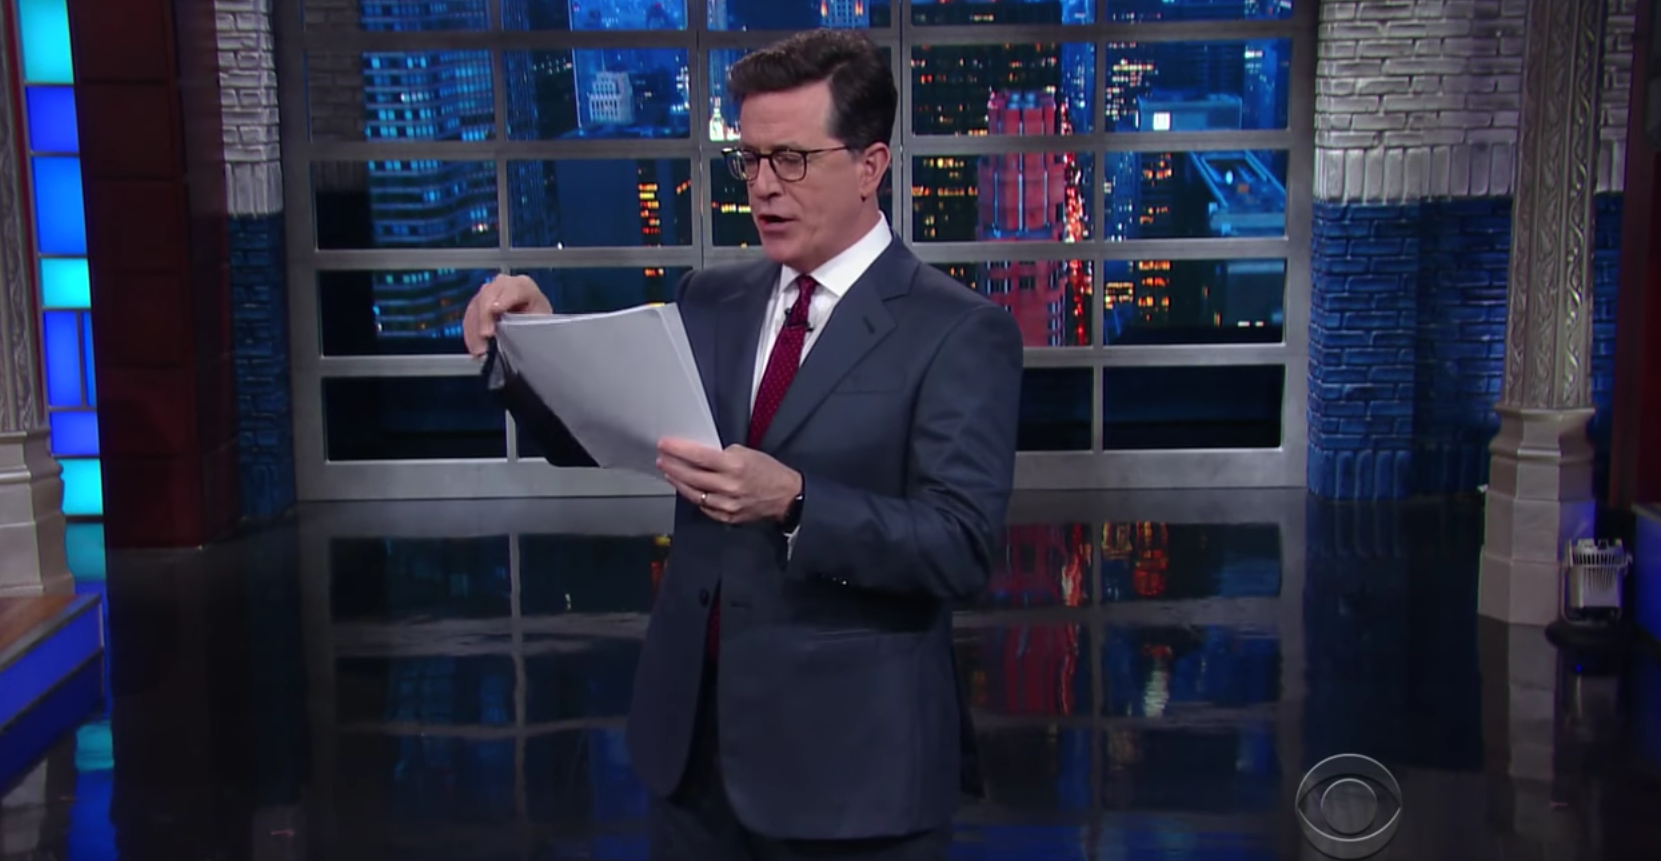 FCC Looking Into Complaints About Stephen Colbert’s Anti-Trump Jokes